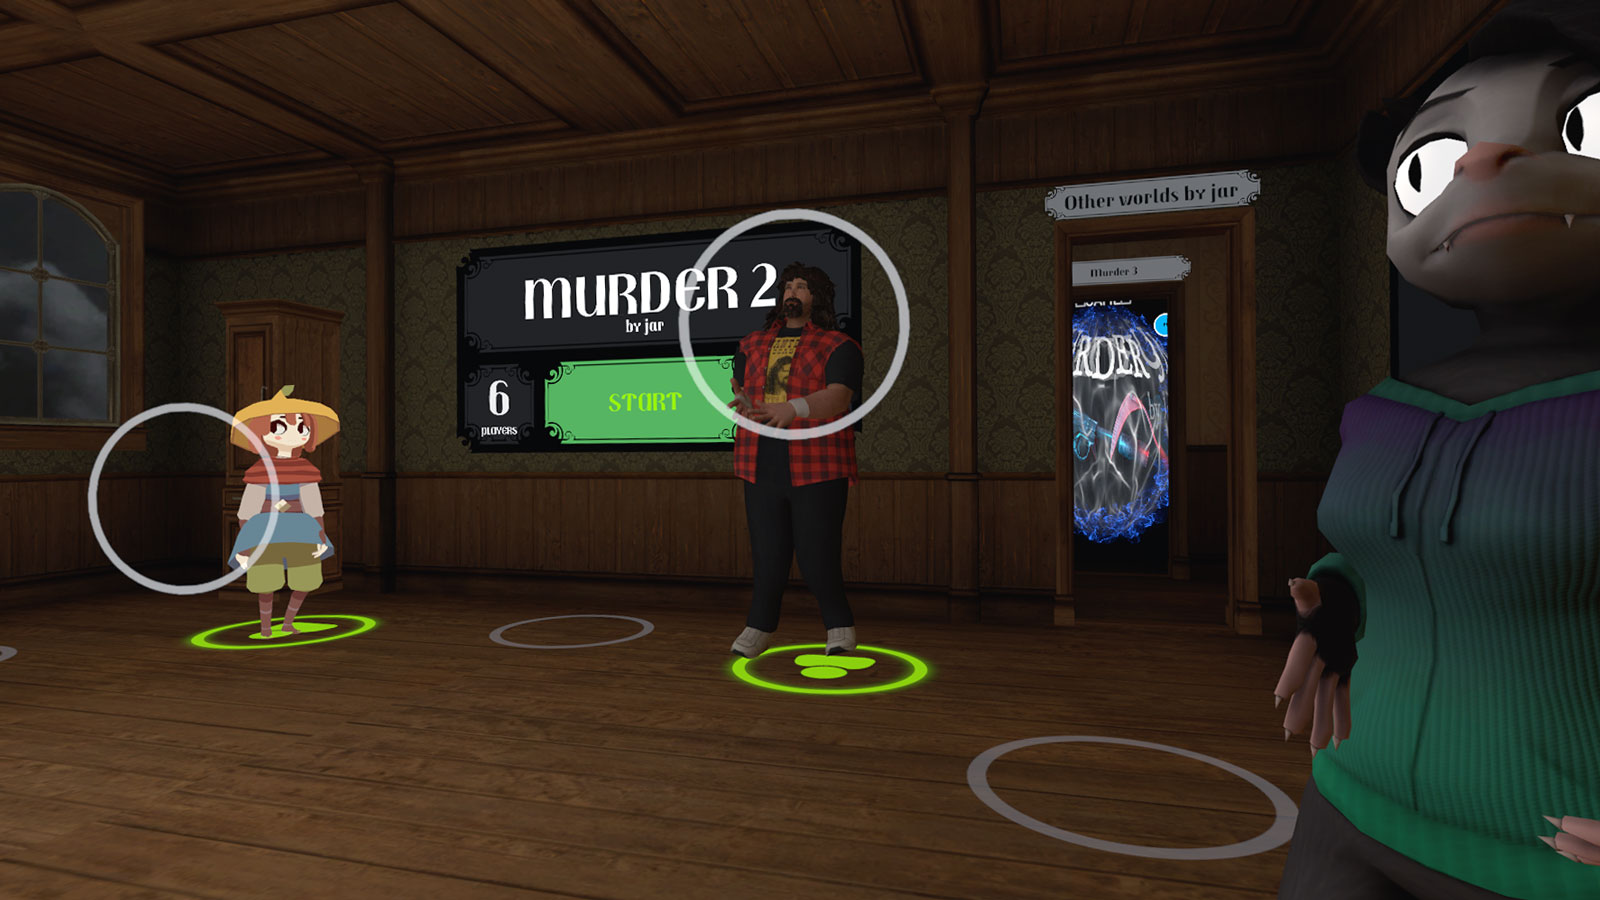 A screenshot of VRChat, social virtual reality application. Two avatars are standing in an entry room for a Murder Game.